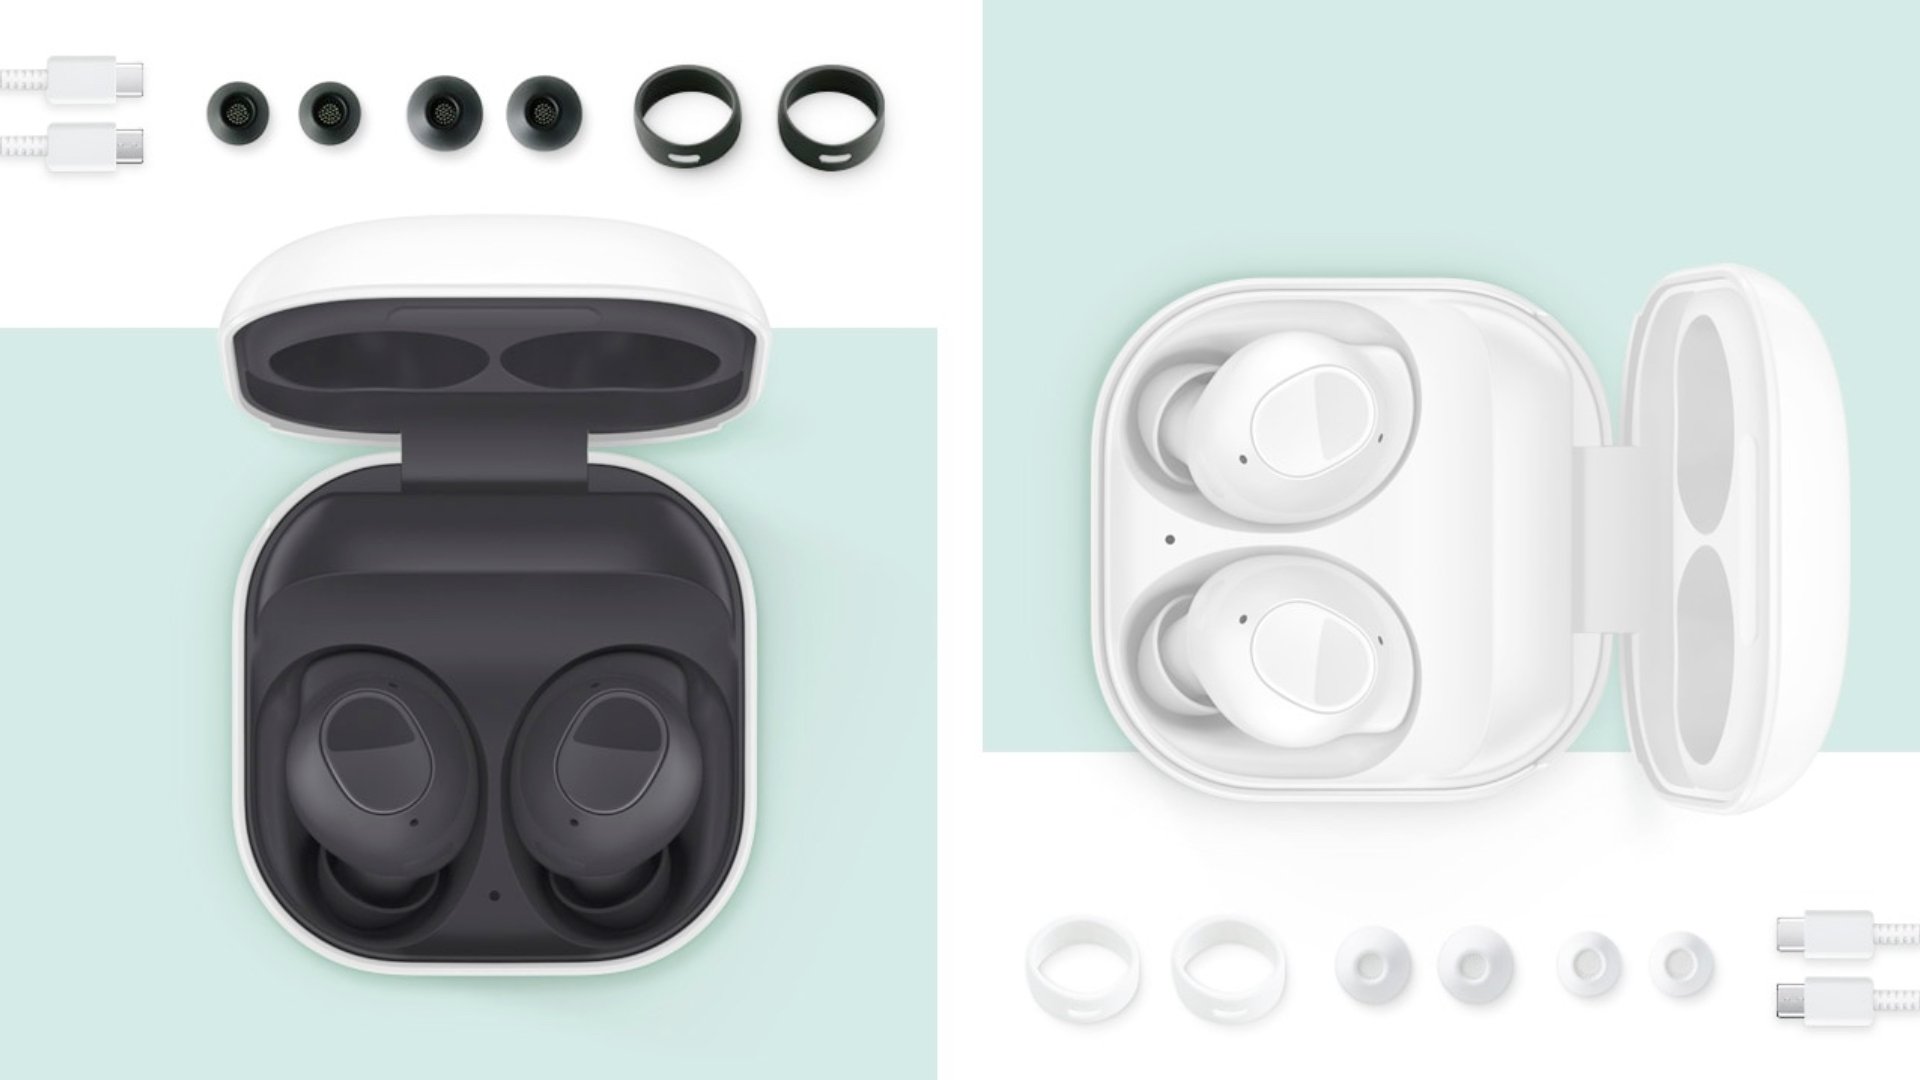 Samsung Galaxy Buds FE  Accessories at T-Mobile